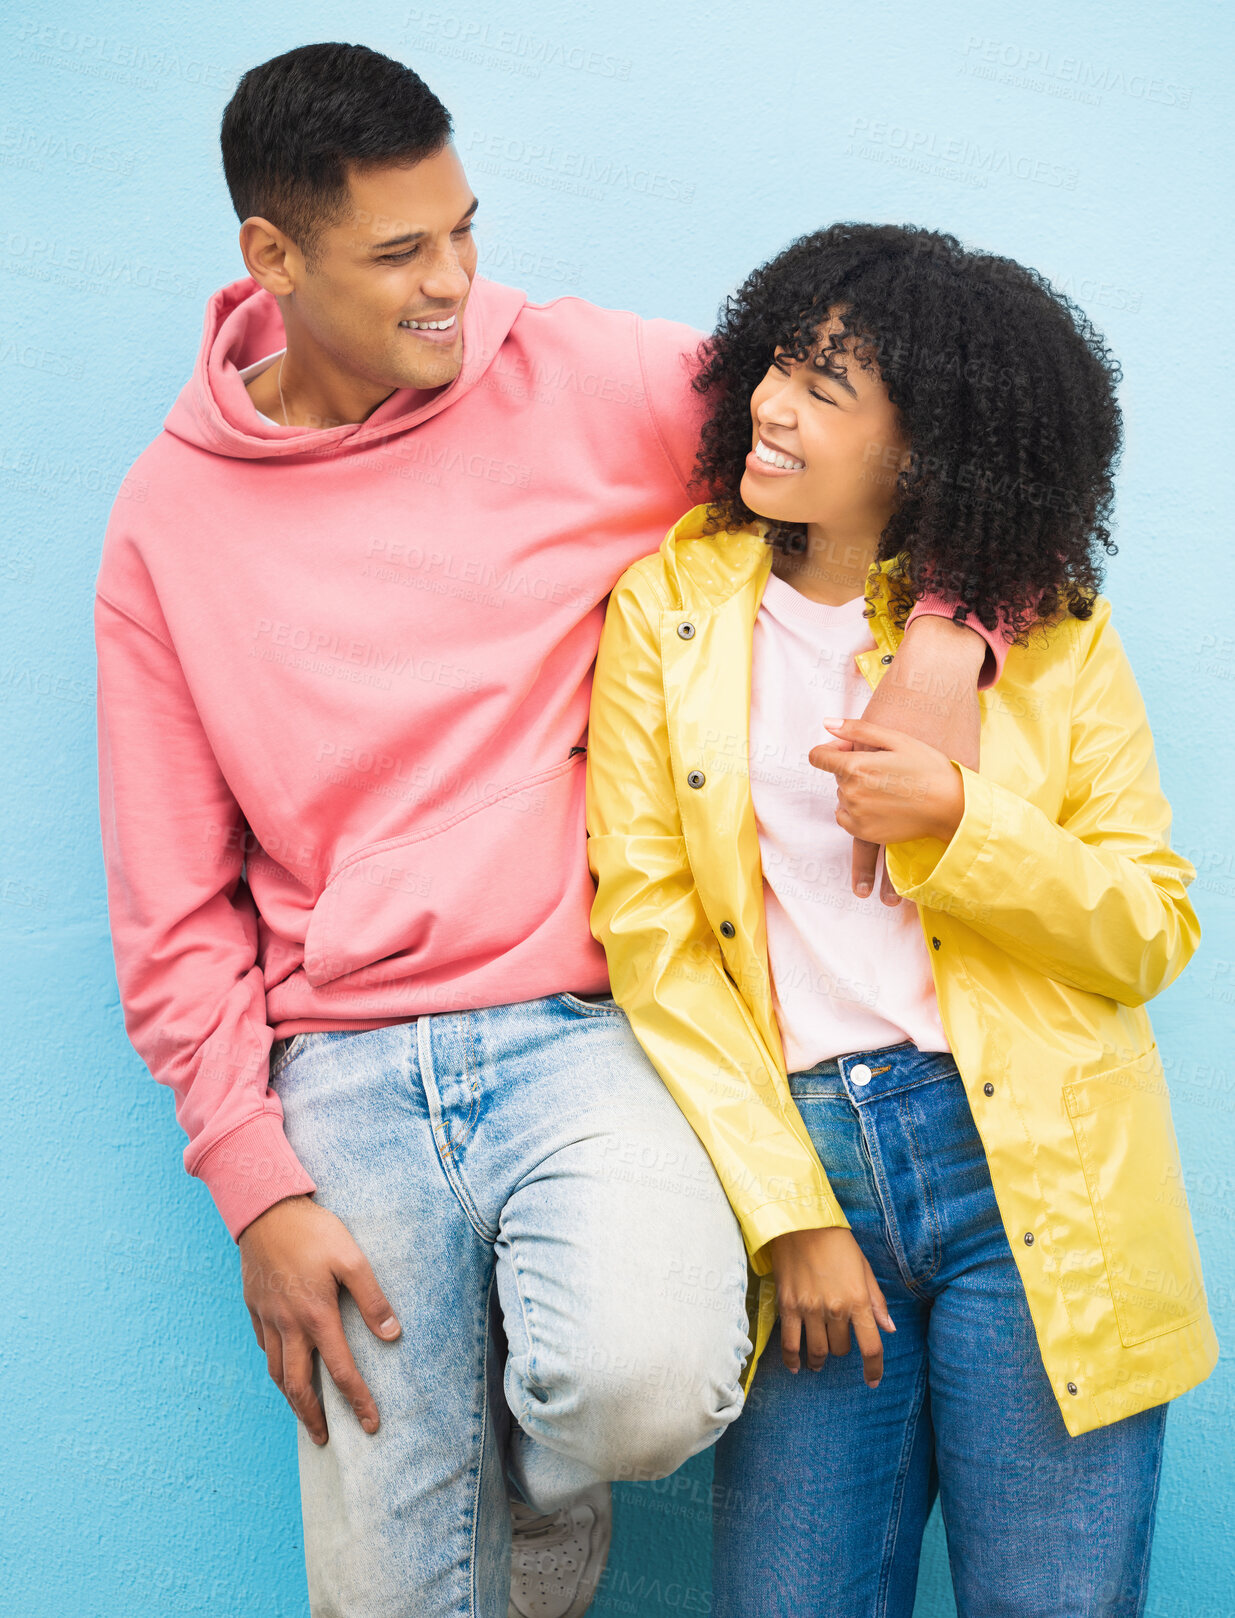 Buy stock photo Couple of friends, bonding and hug on isolated blue background in fashion, afro hair trend and cool style clothes. Smile, happy man and black woman in embrace on wall mock up backdrop in Brazil